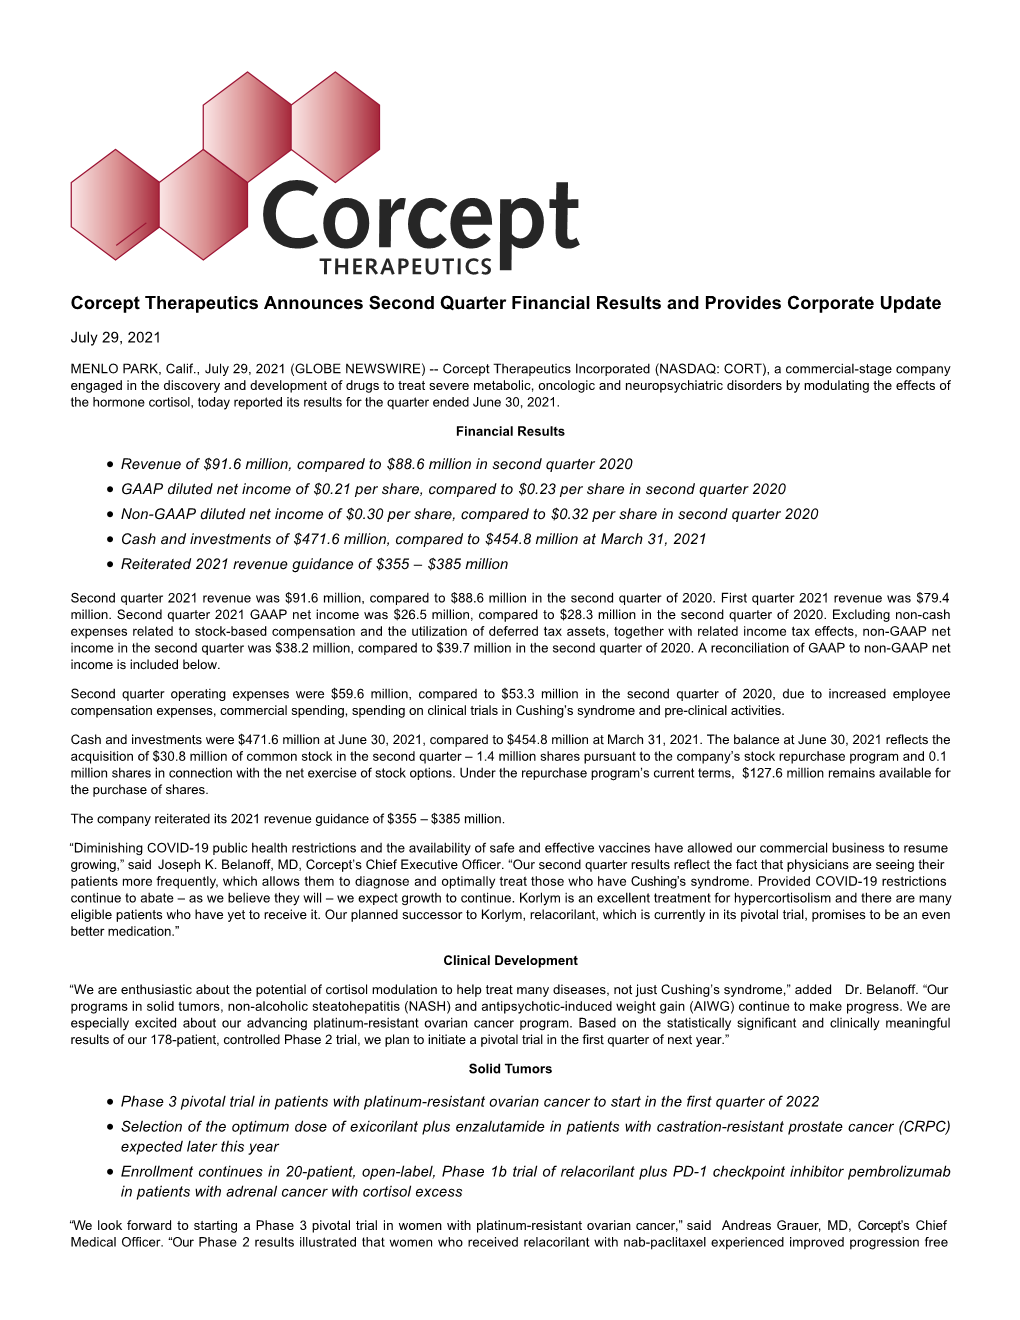 Corcept Therapeutics Announces Second Quarter Financial Results and Provides Corporate Update